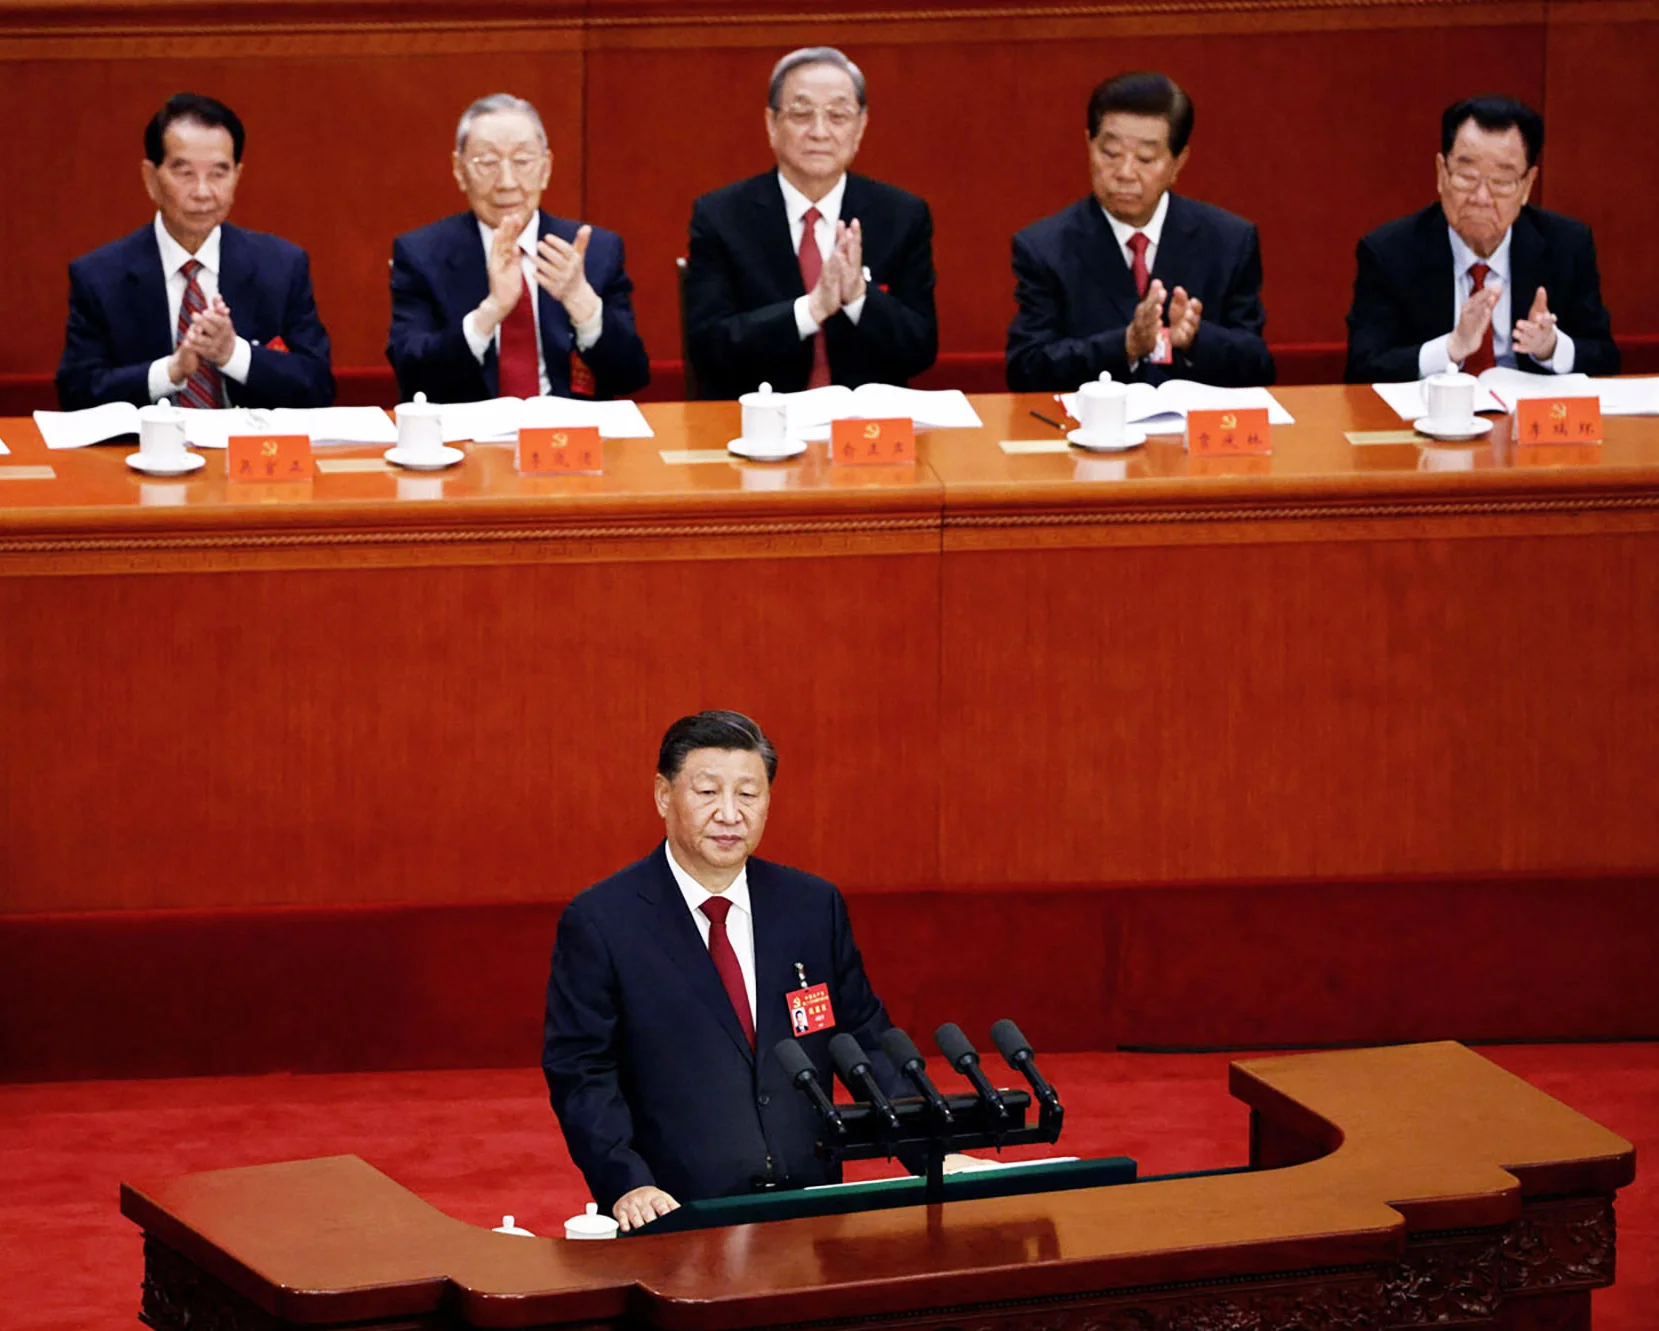 President Xi Jinping, 20th National Congress of the CPC